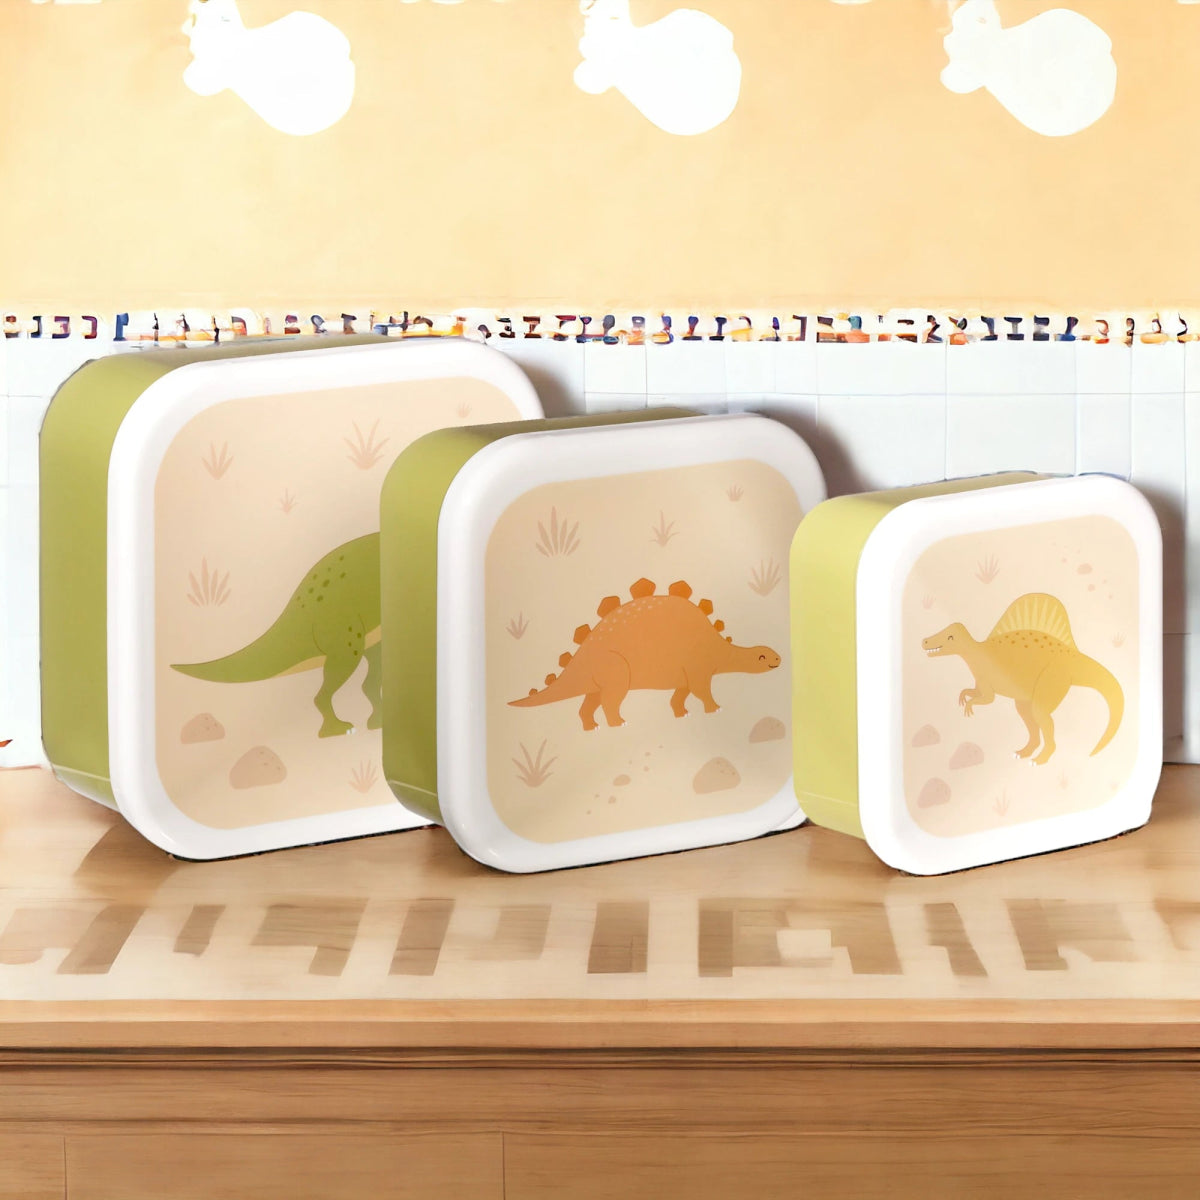 Desert Dino Lunch Boxes - Set of 3 - Lunch Boxes by Sass & Belle